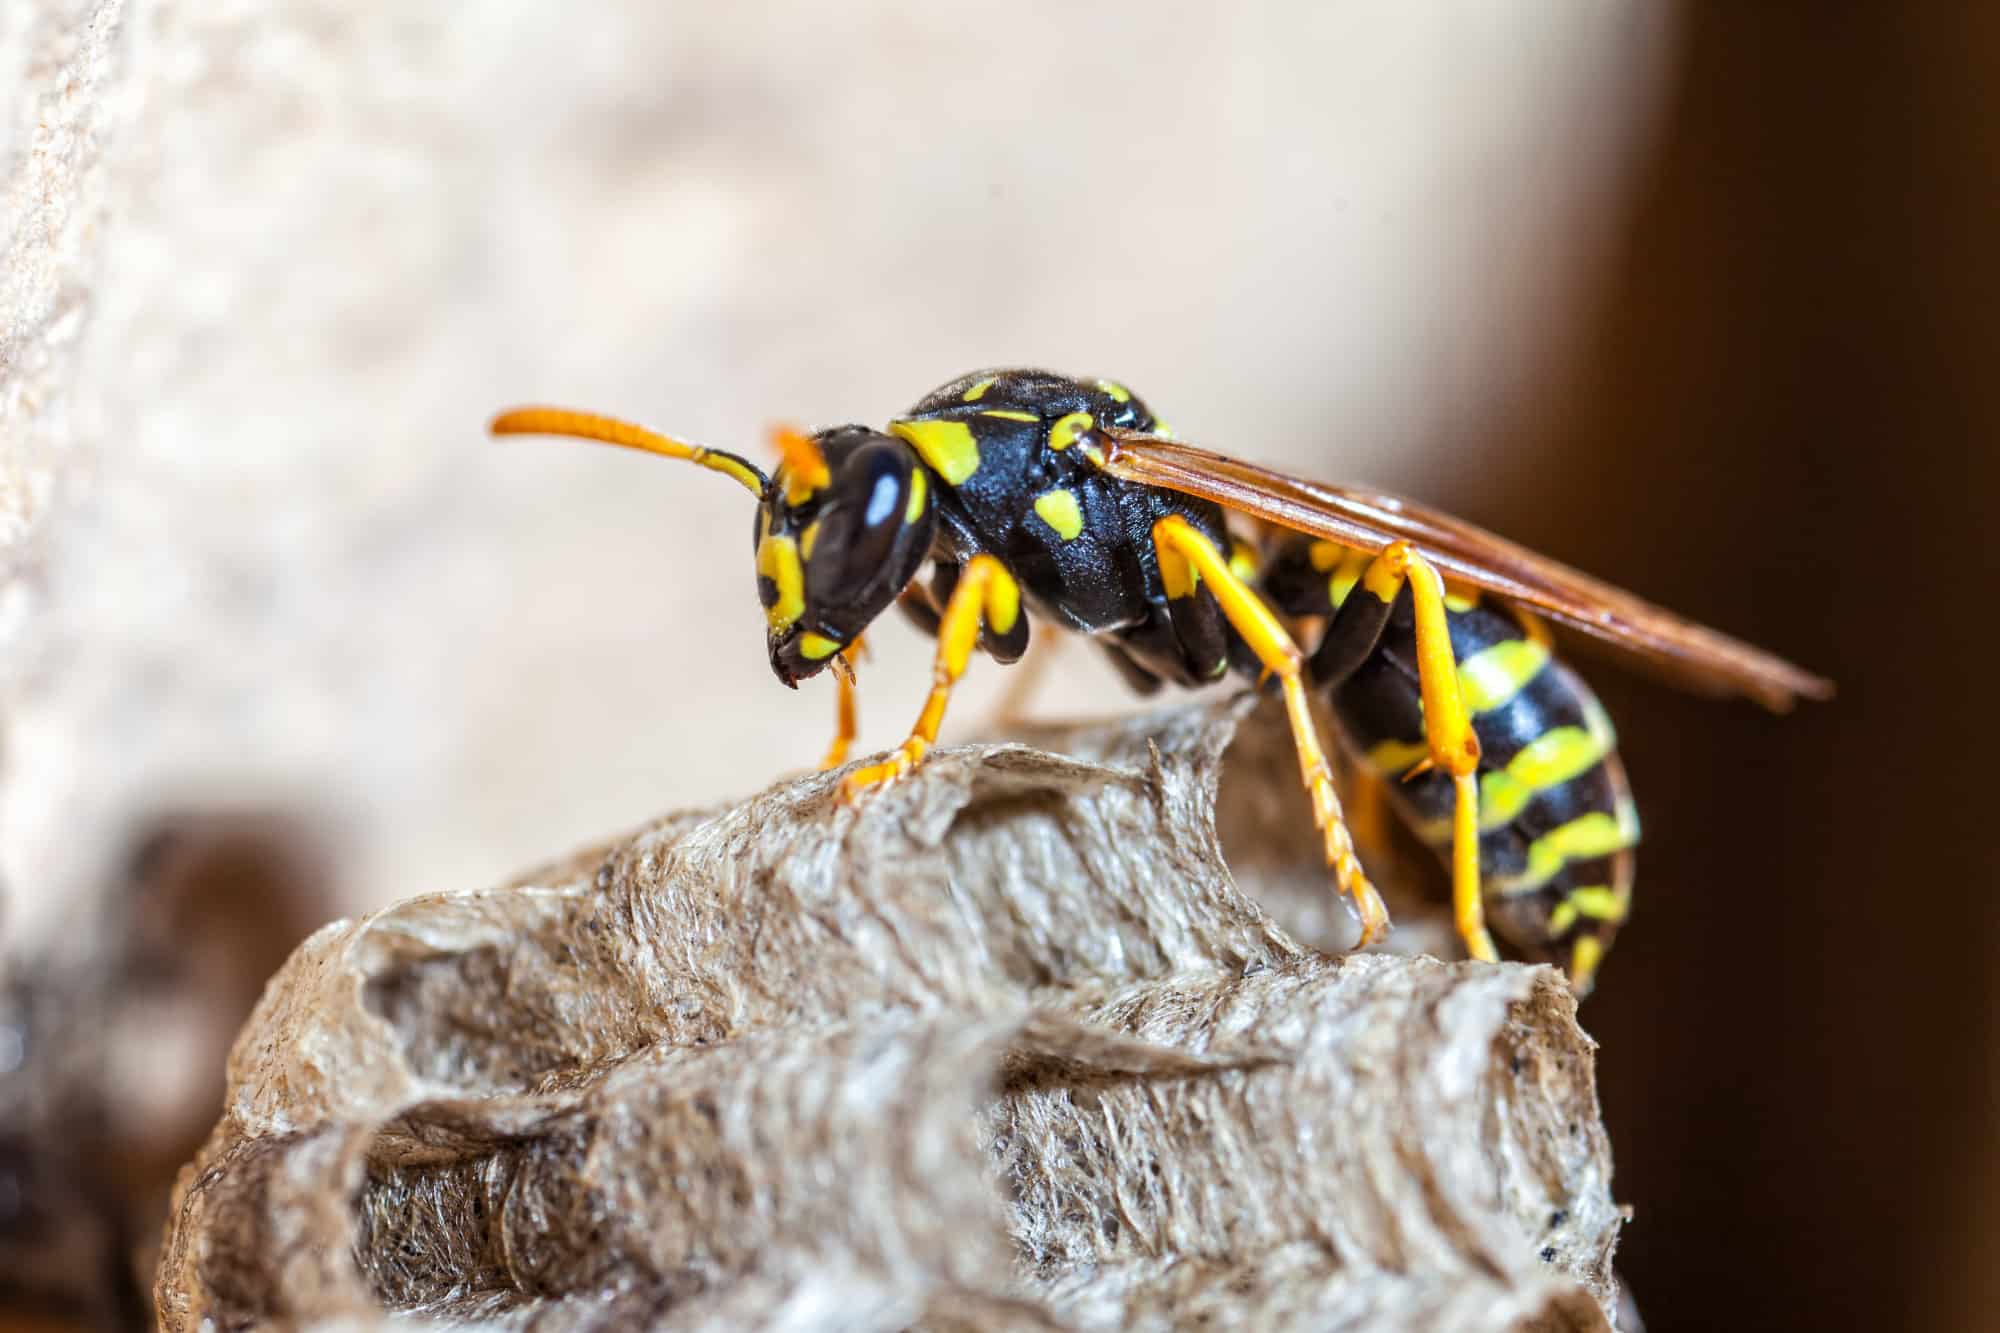 Bee and Wasp Control: Safely Get Rid of Those Stinging Pests